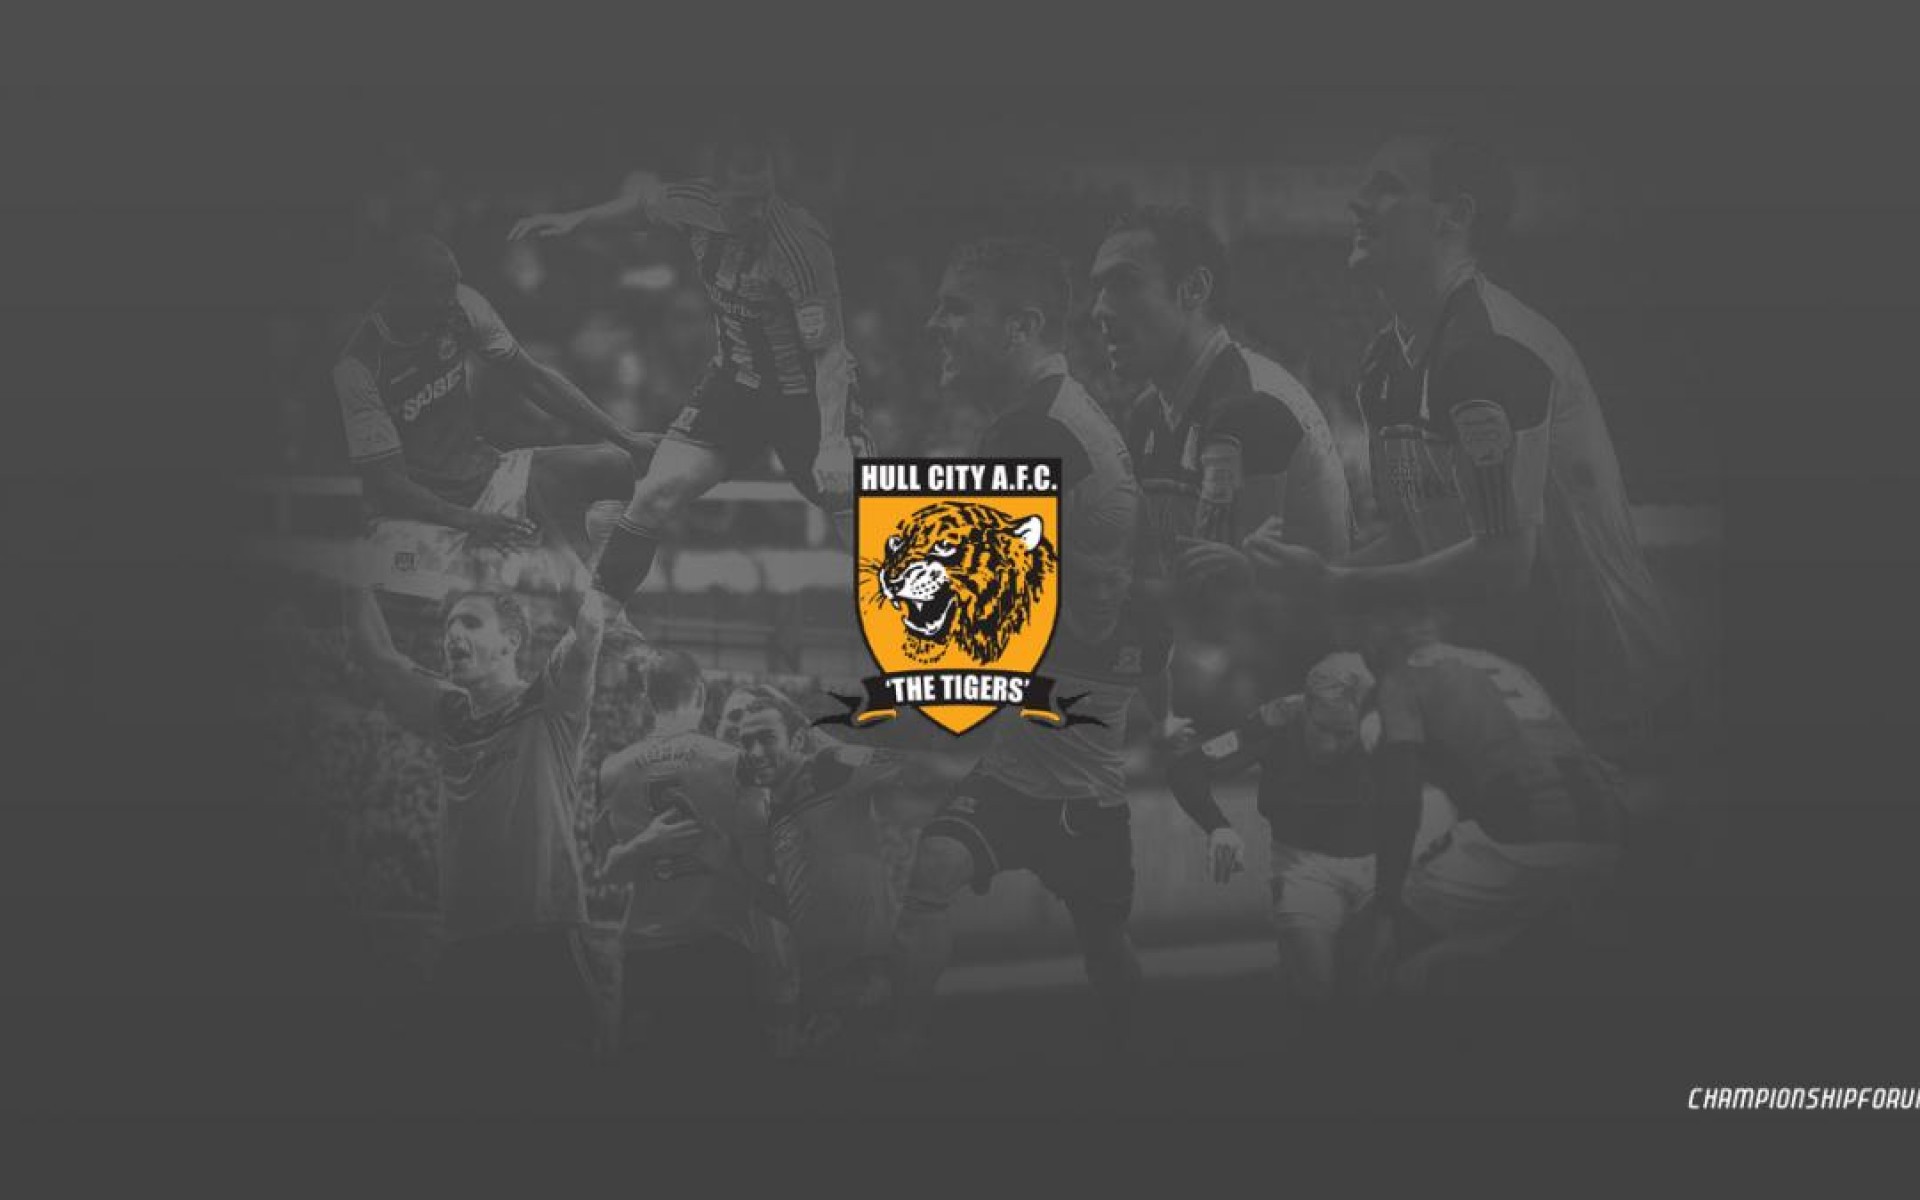 Hull Fc Wallpaper together with hull city england also swansea ...